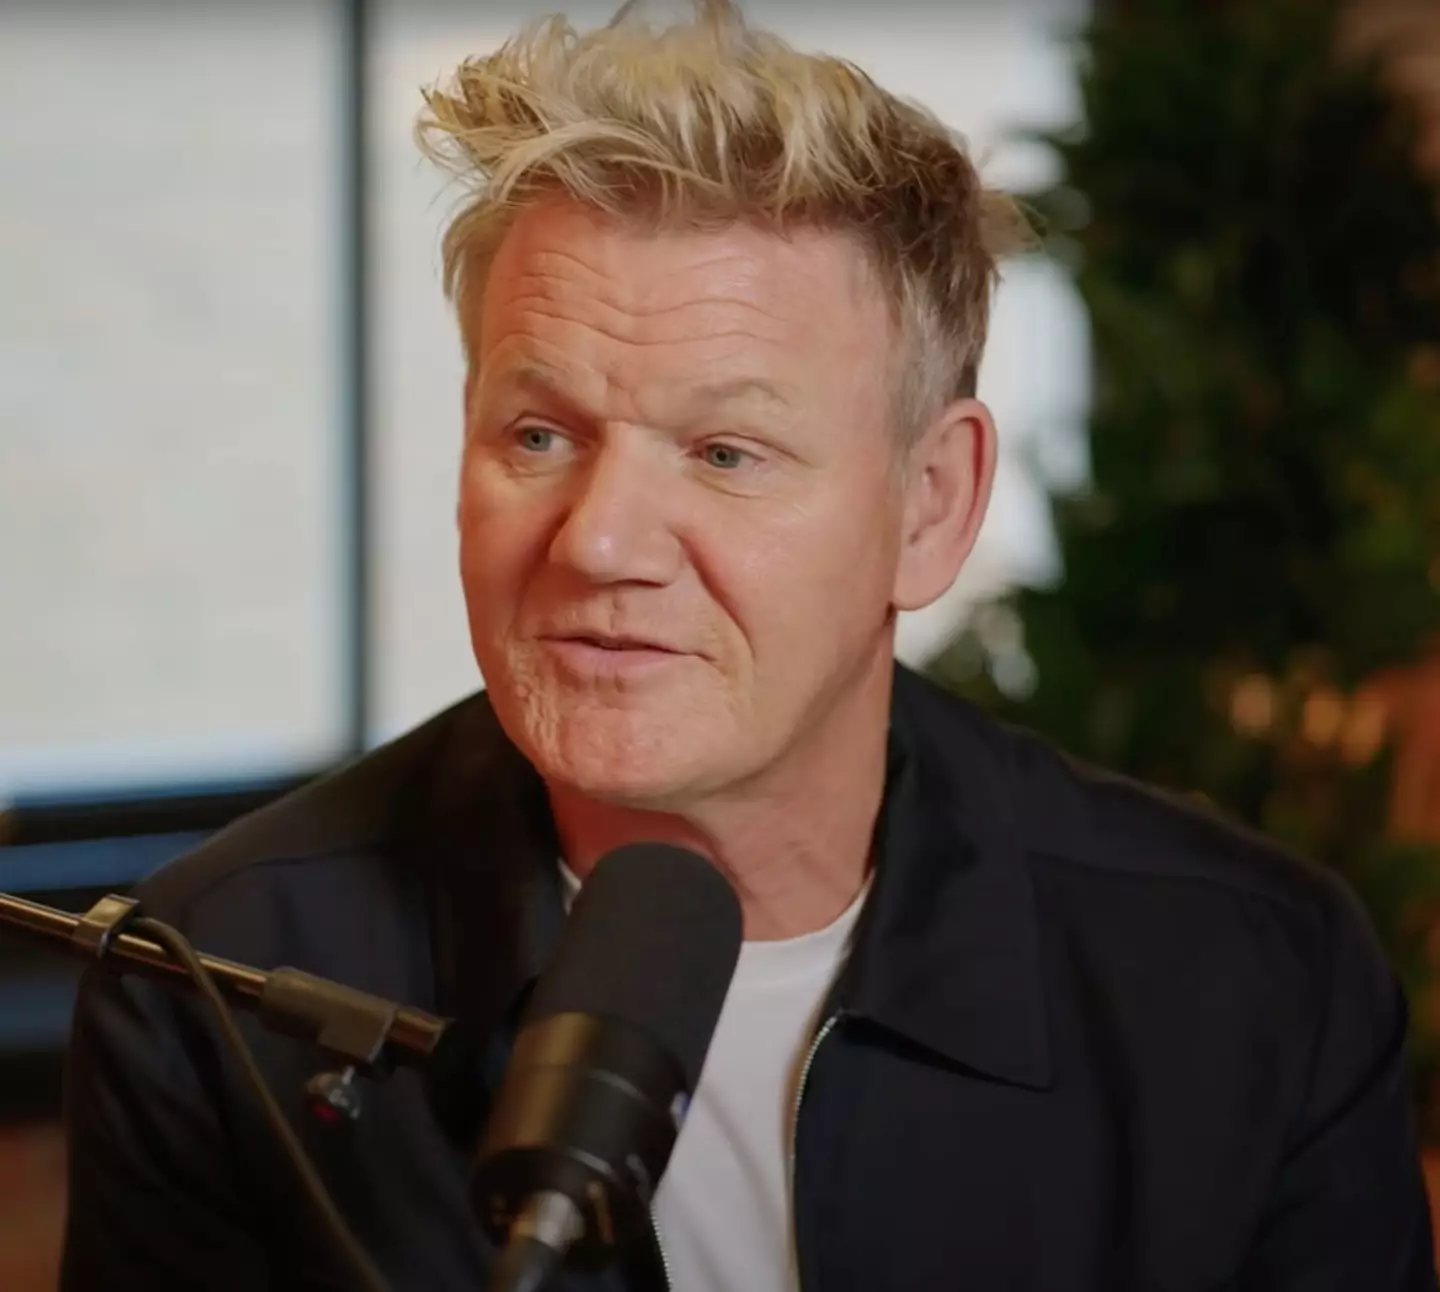 Gordon Ramsay has revealed if he plays up his sweary outbursts for the cameras.